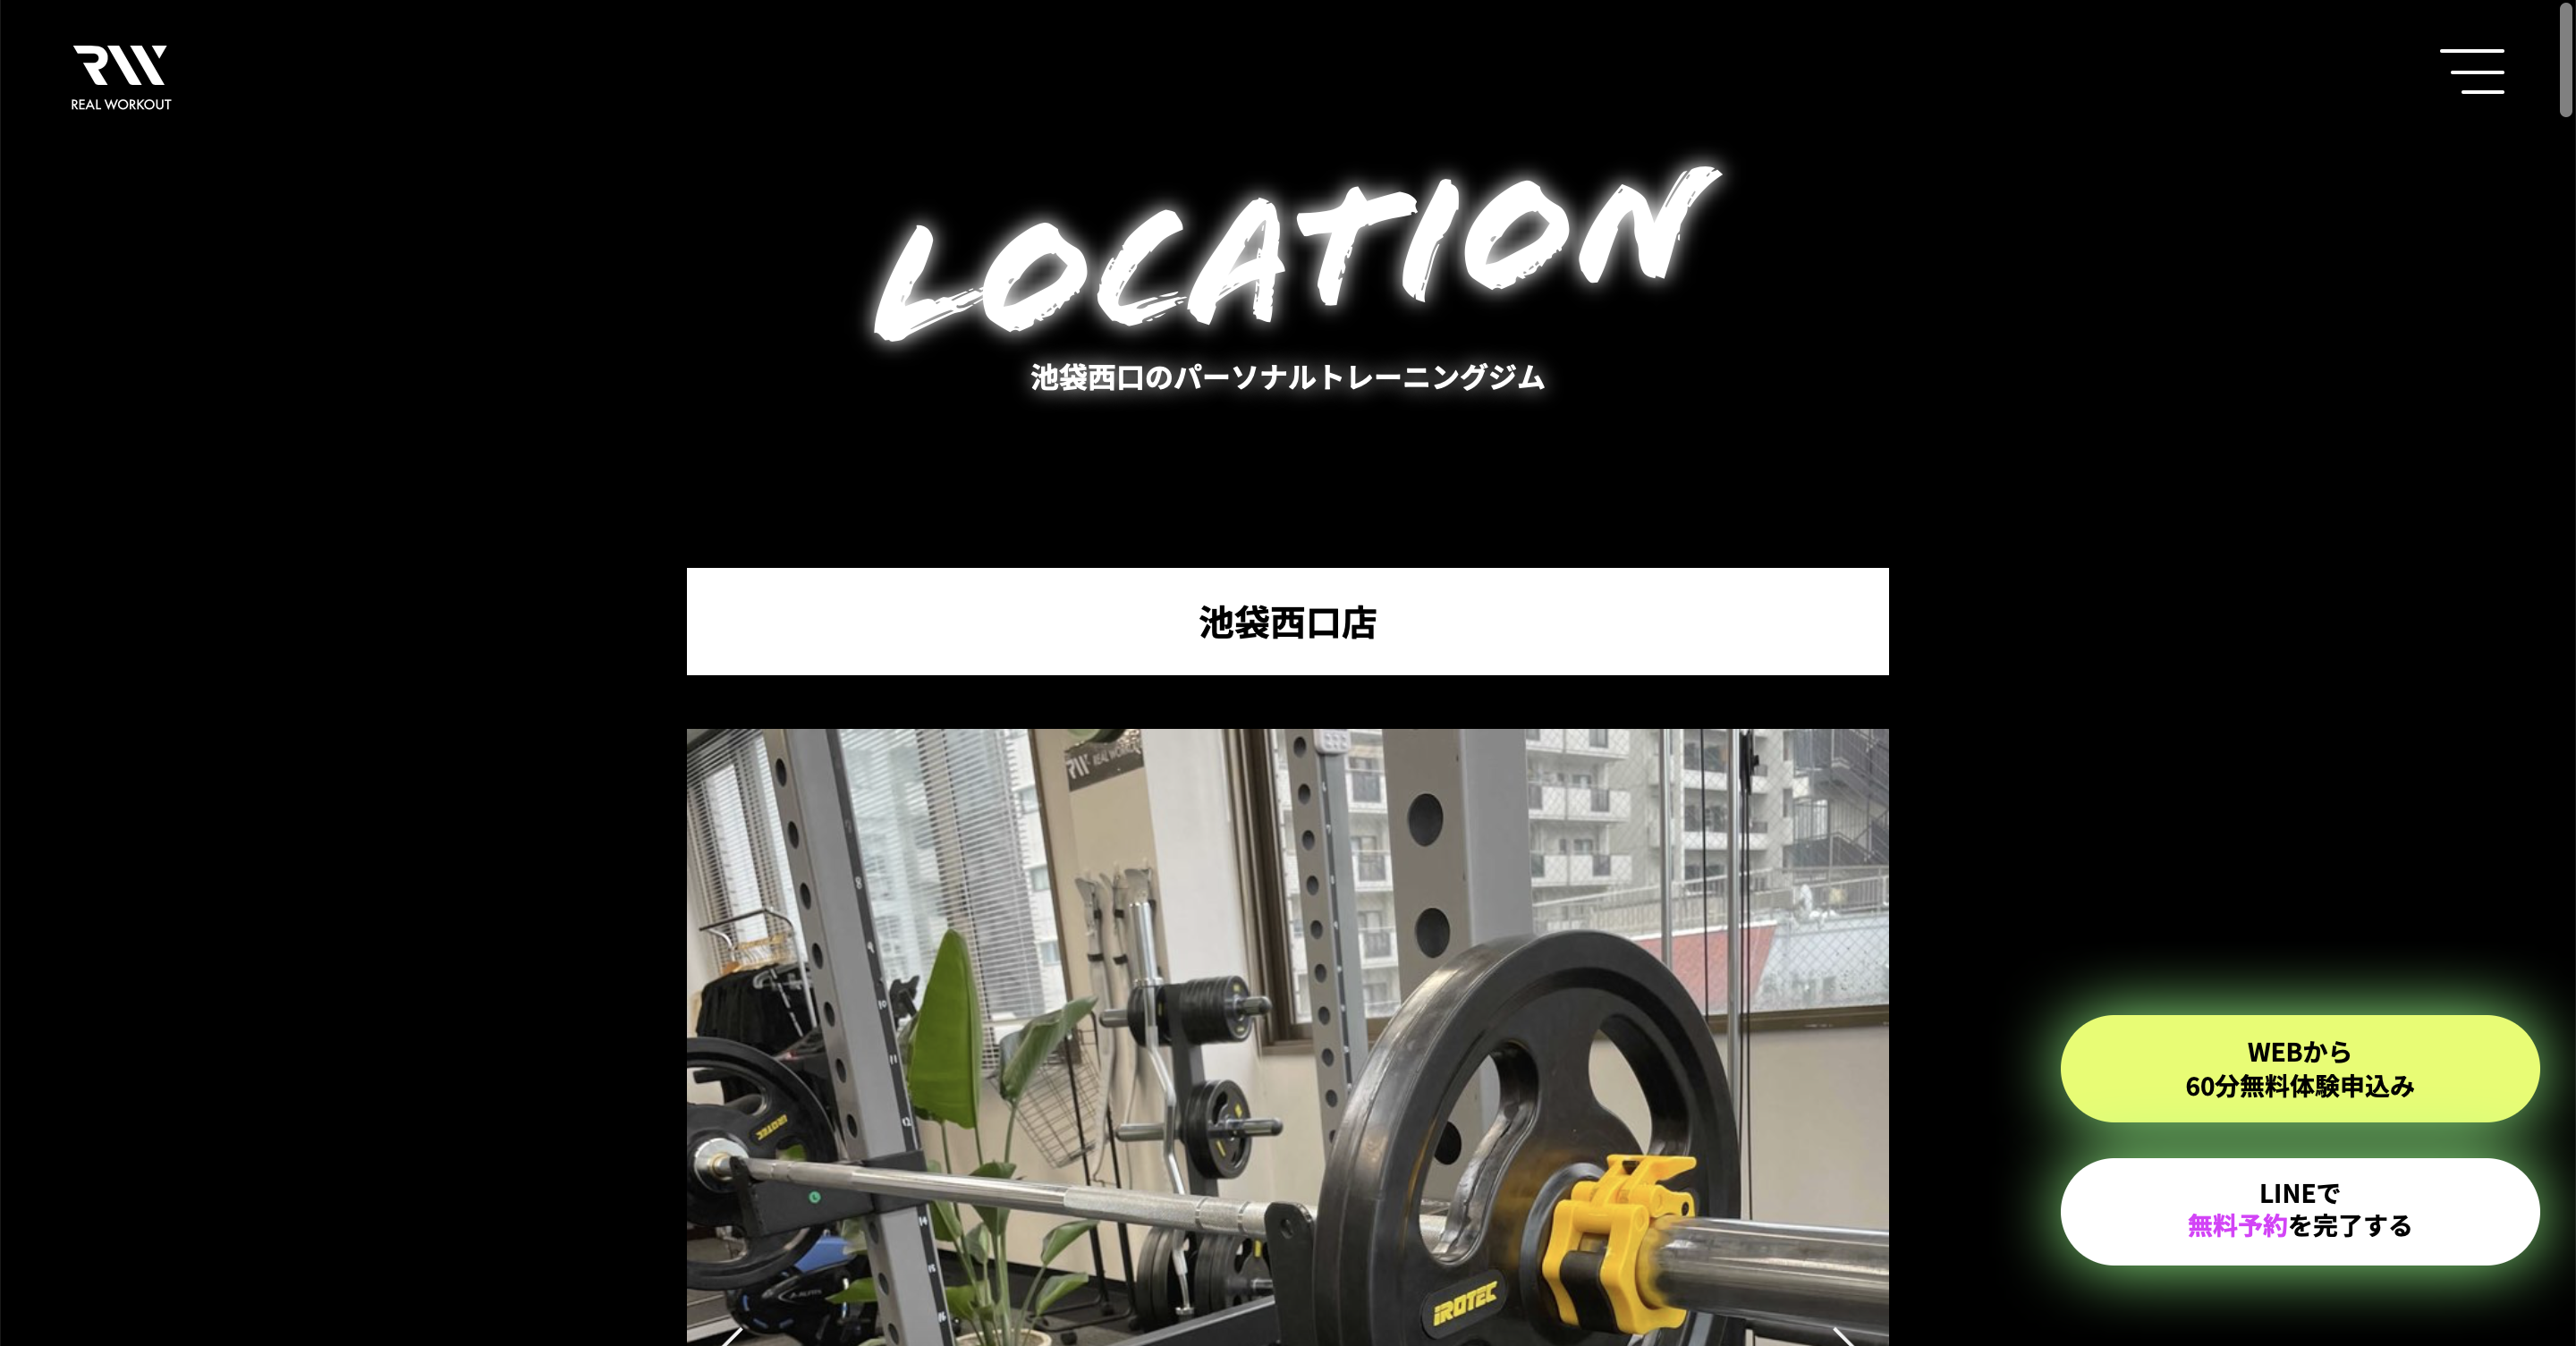 4.REAL WORKOUT 池袋西口店